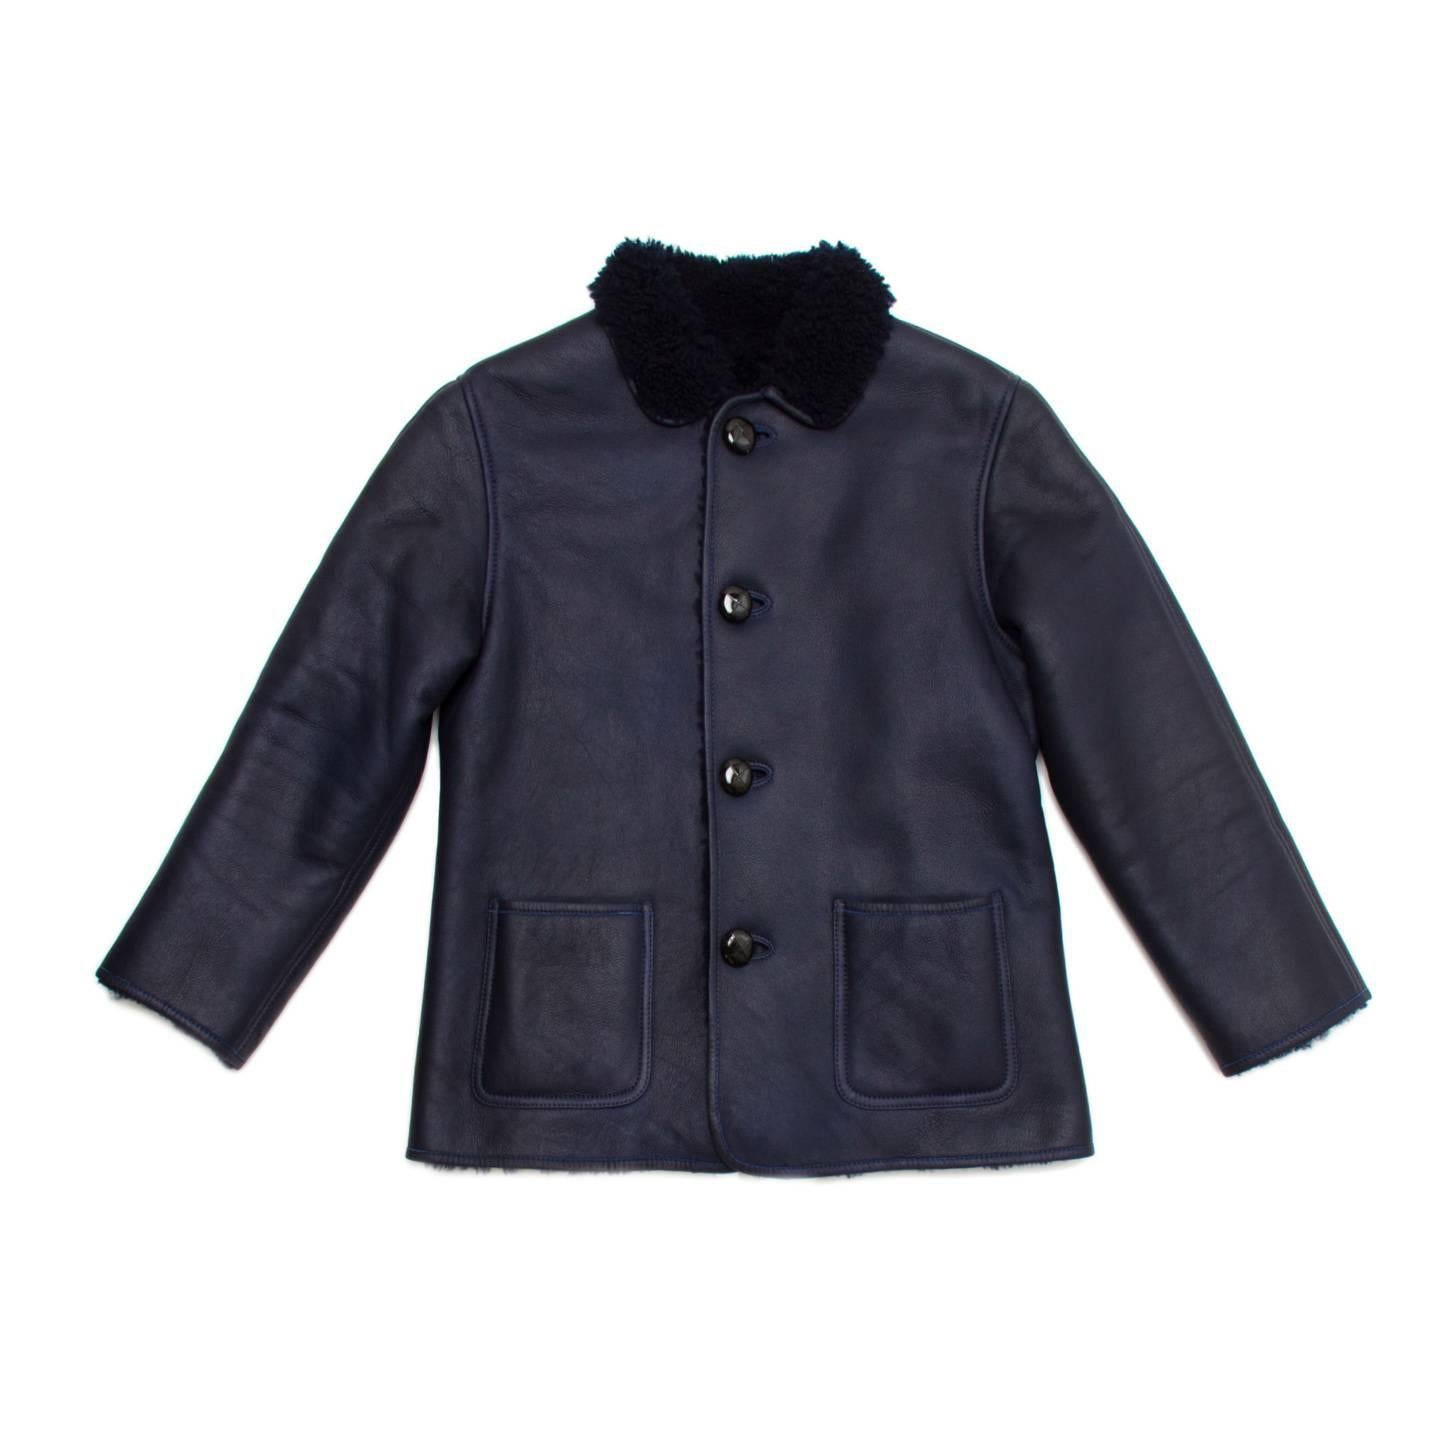 Midnight blue reversible lambskin hip length coat with peter pan collar. Black patent leather buttons fasten the center front on the suede side, while when worn on the fur side the buttons are tone on tone. Two rounded patch pockets enrich the front